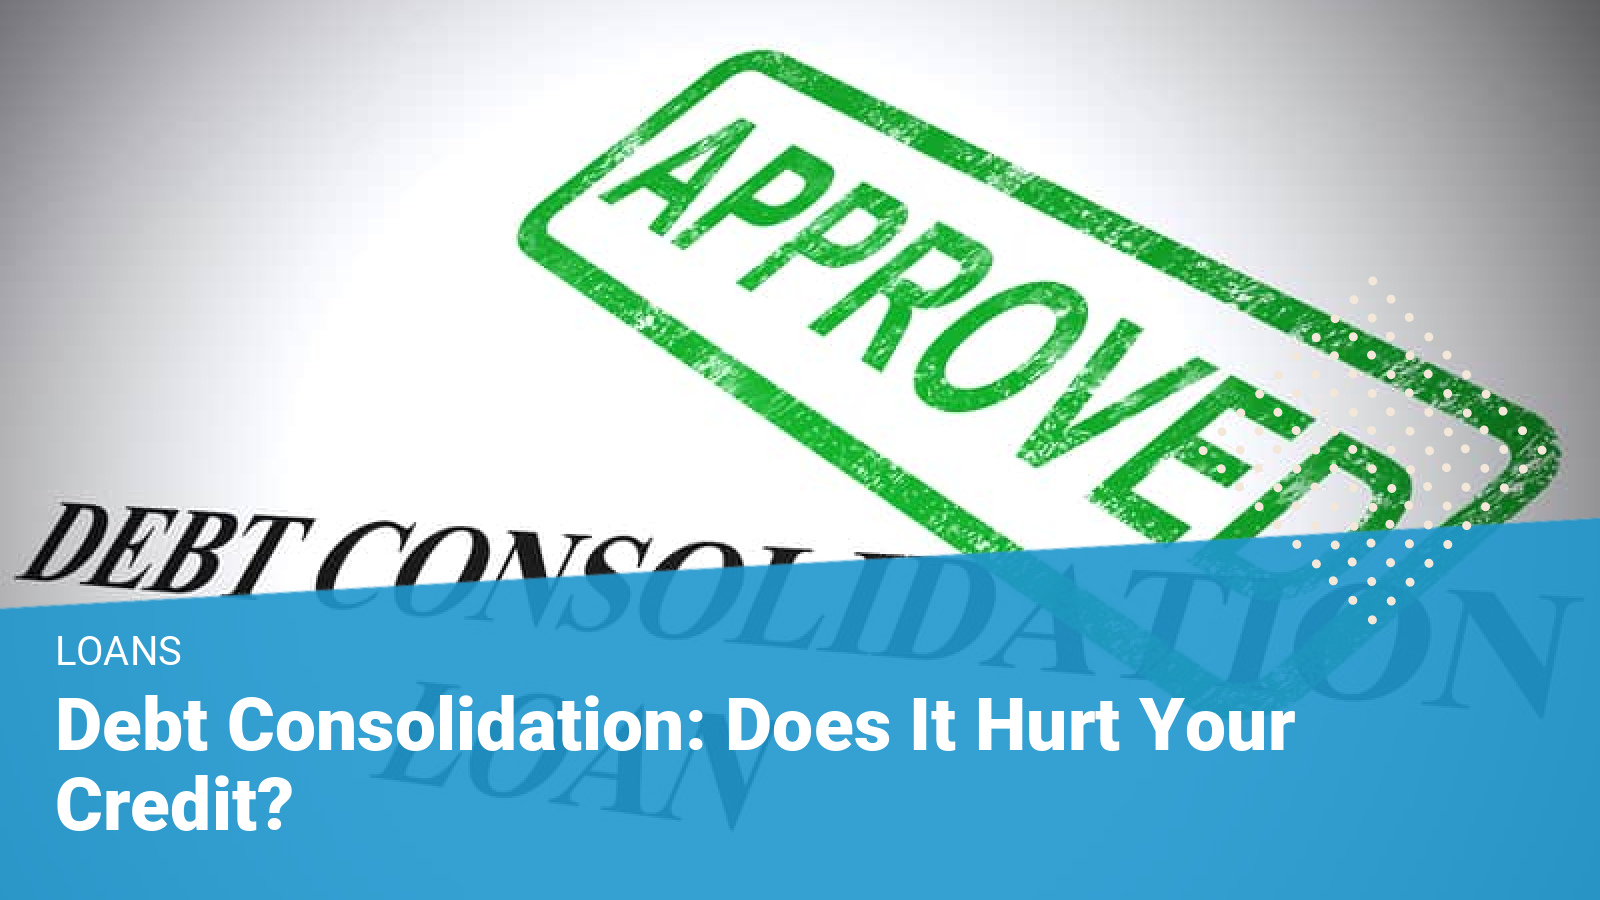 Debt Consolidation - is it right for me?